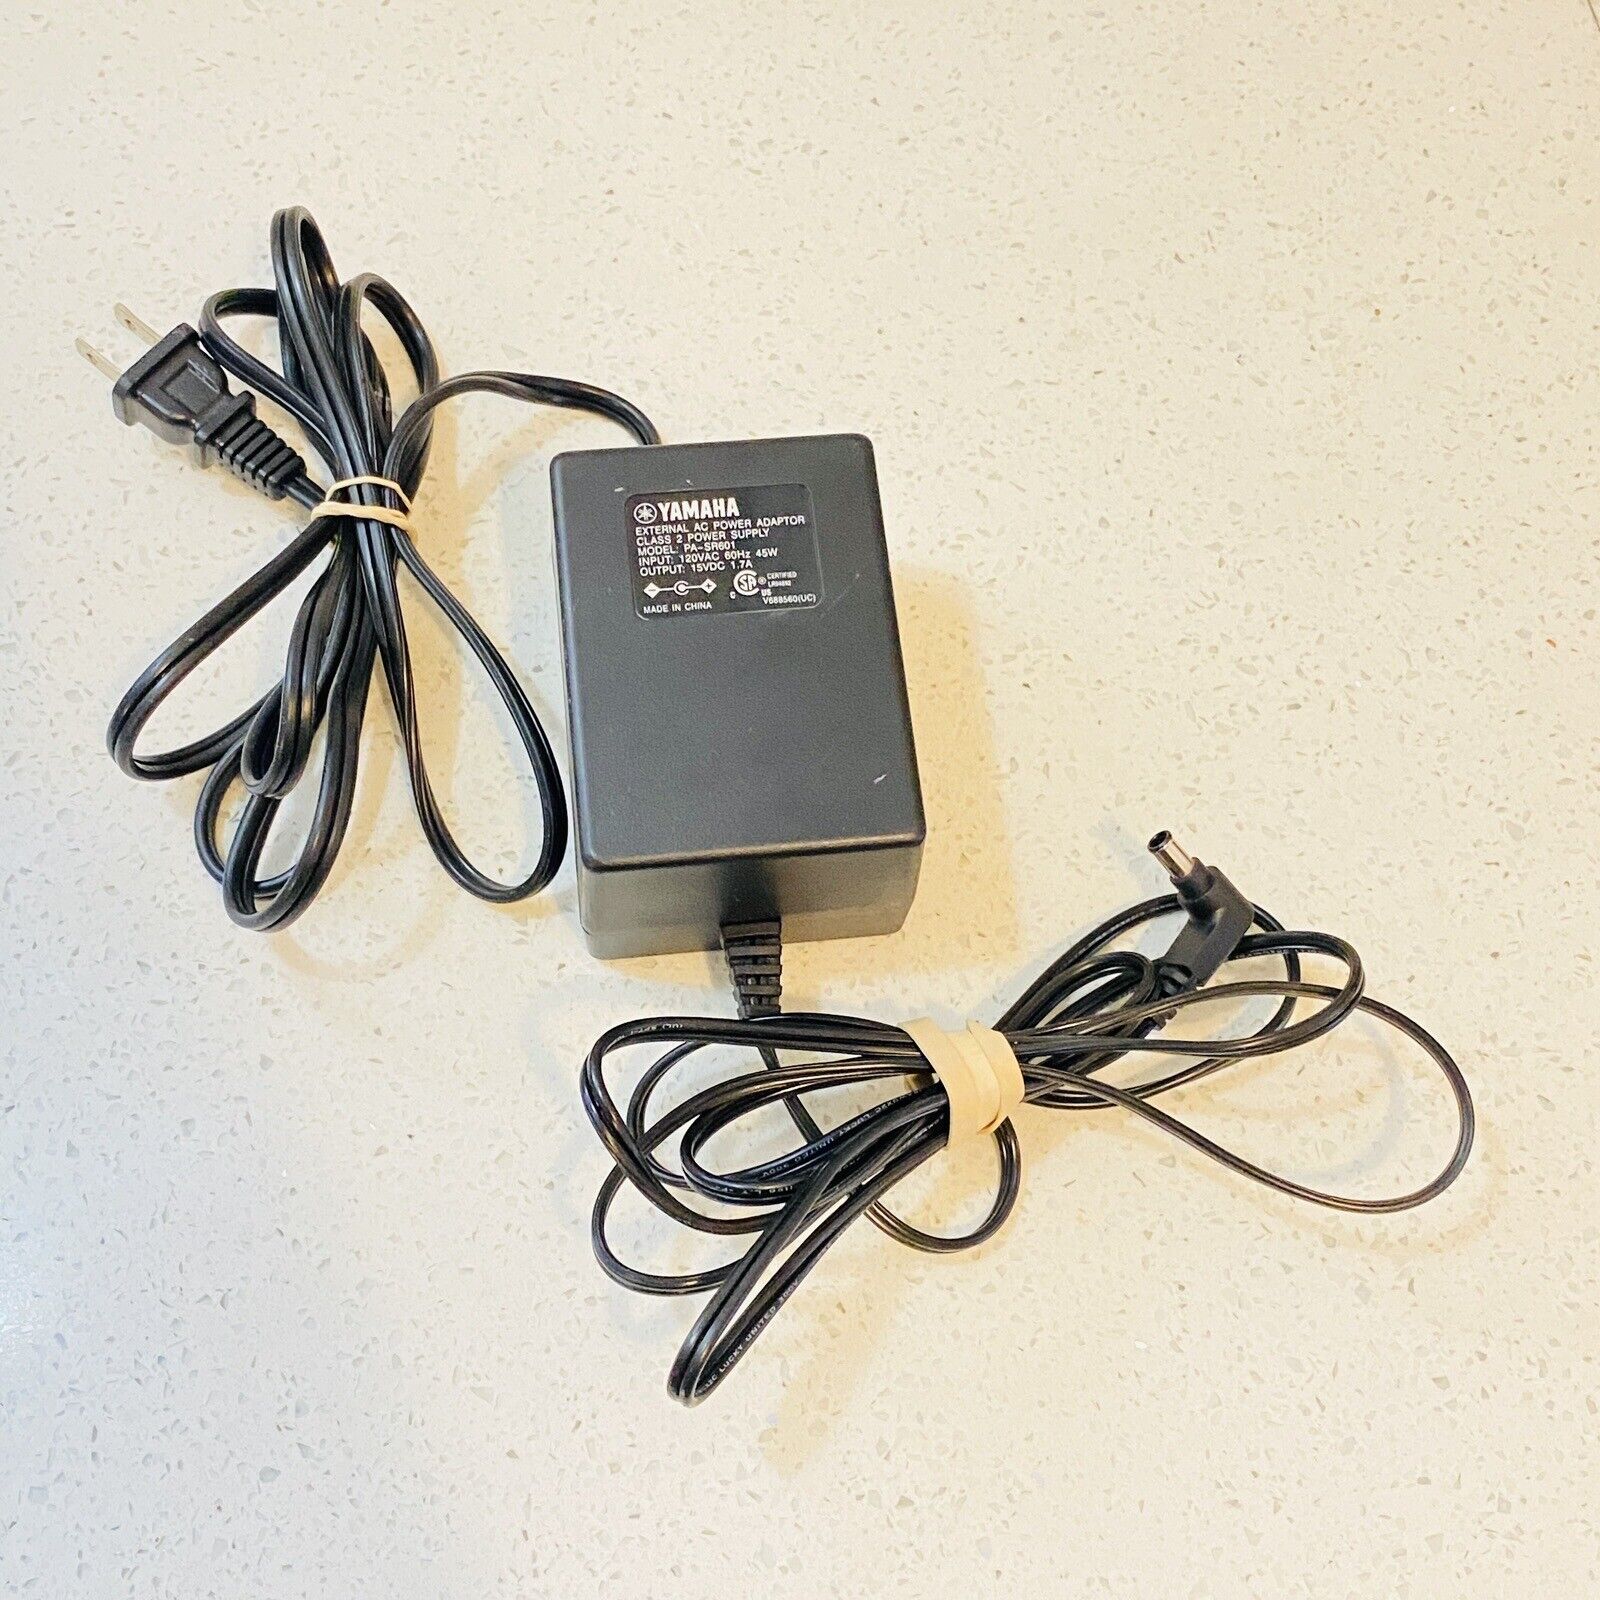 Genuine YAMAHA PA-SR601 - AC/DC ADAPTER 15VDC 1.7A Class 2 Power Supply Works